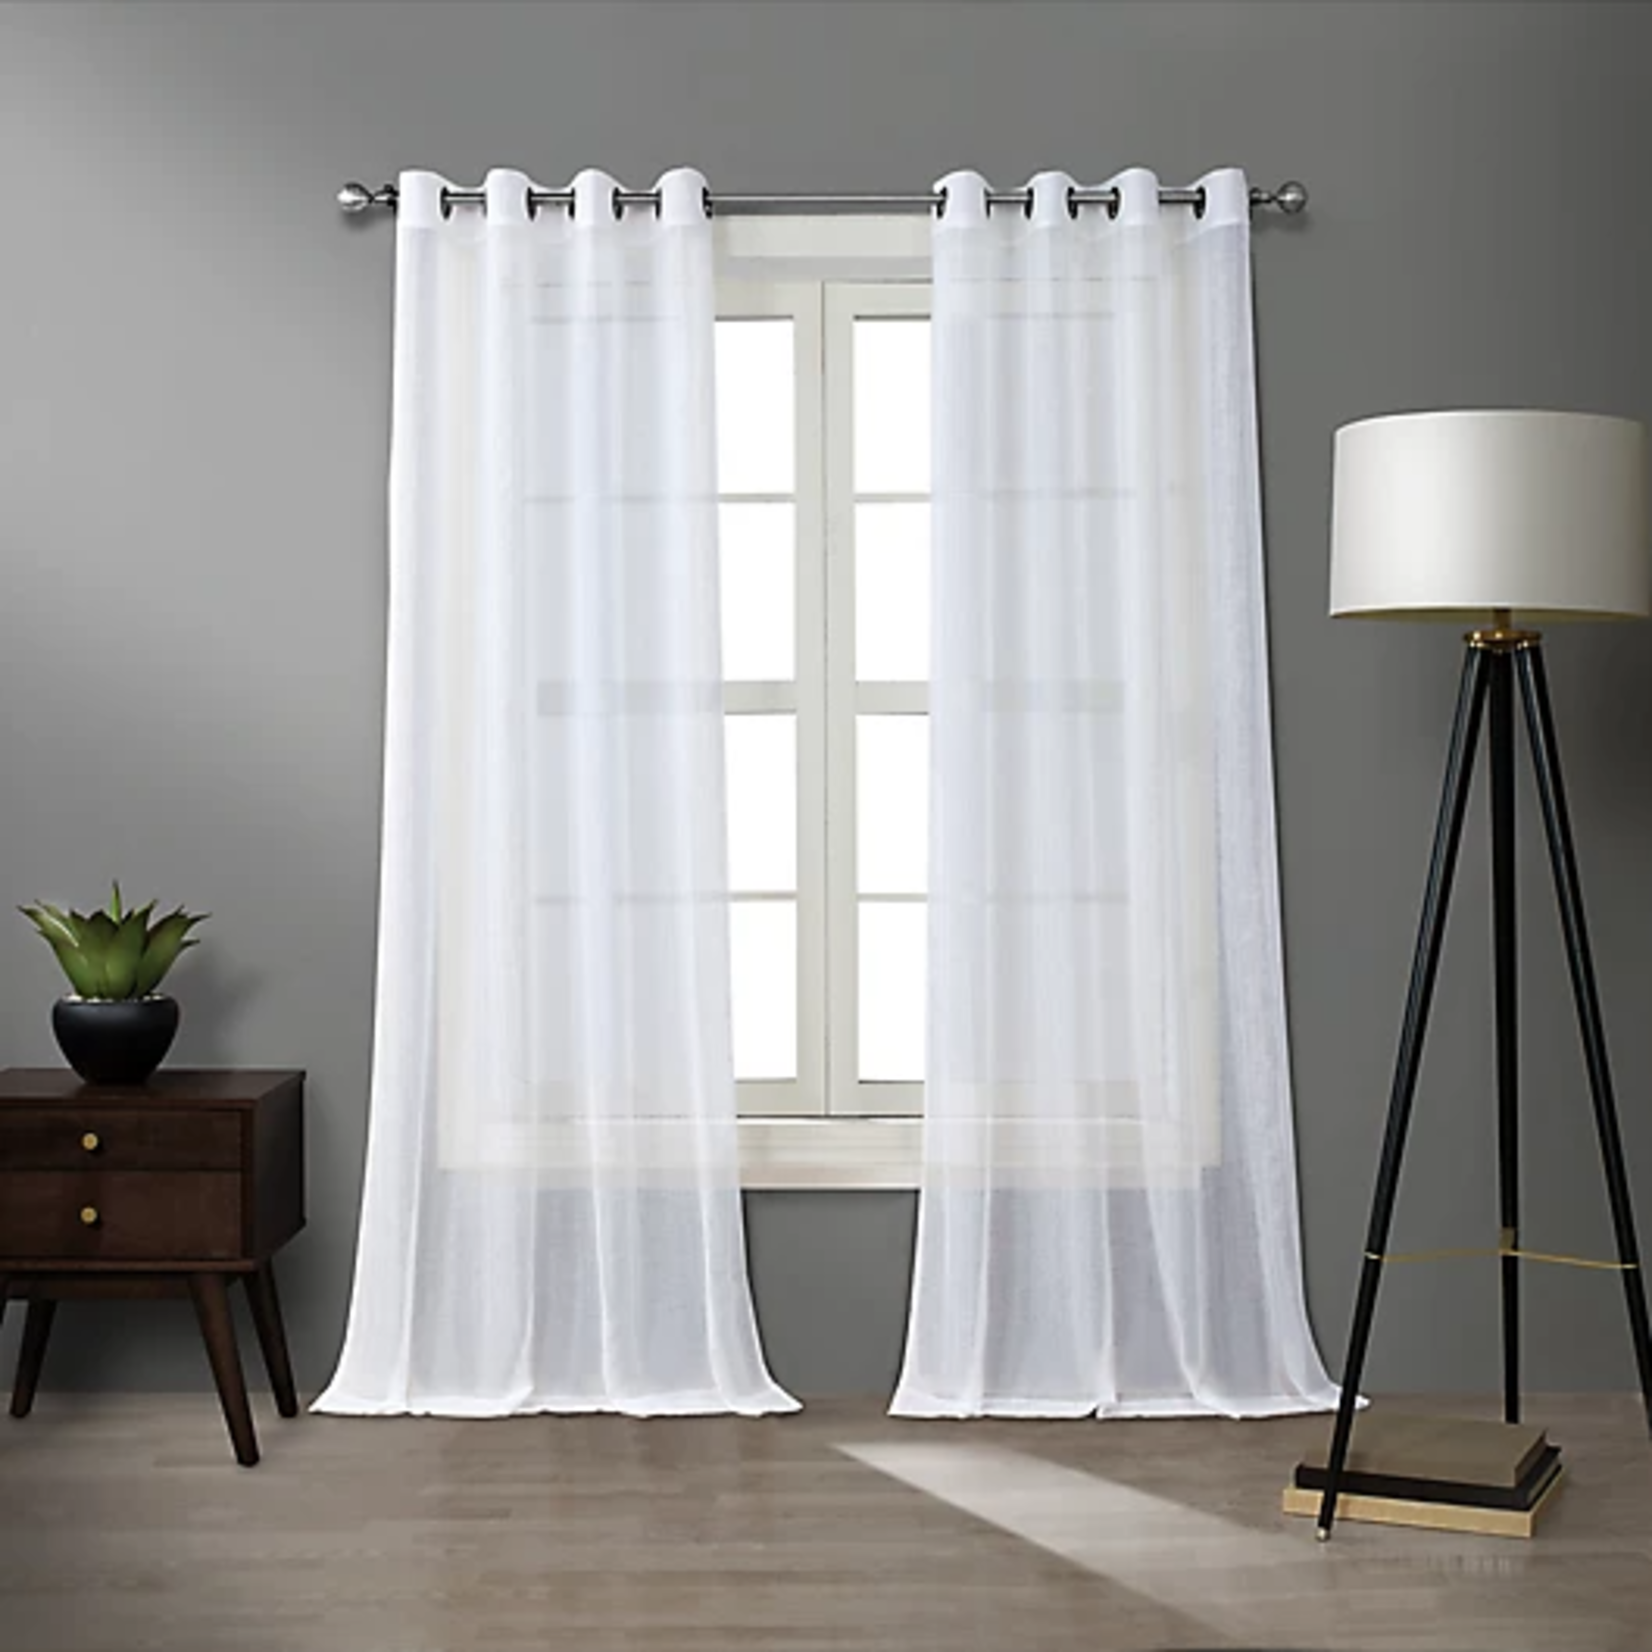 O&O by Olivia & Oliver | Walker Sheer Curtain Panel 95" - White/Silver (Single)